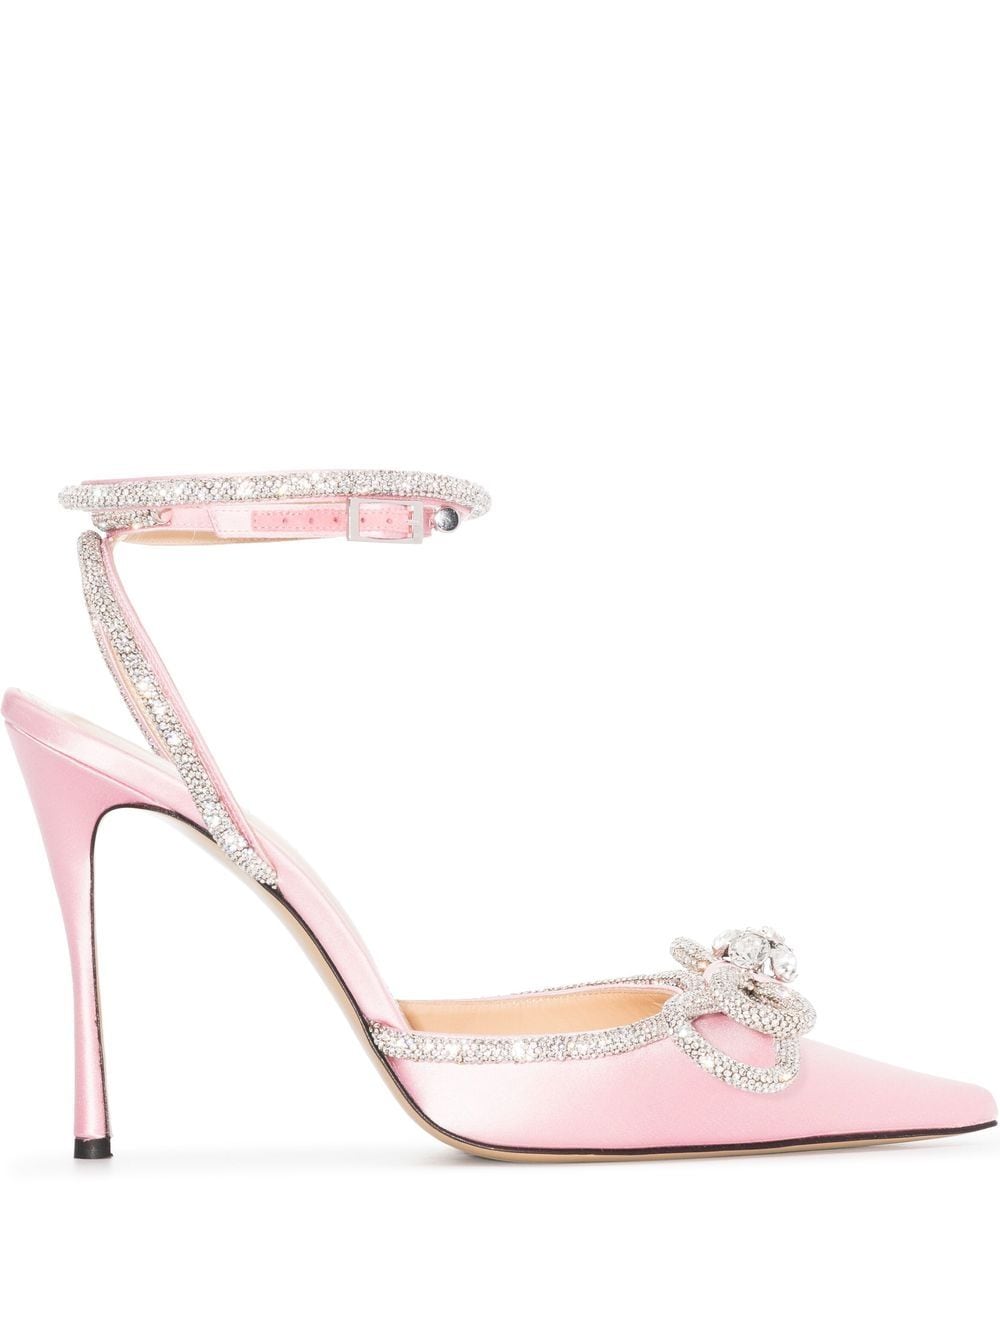 Image 1 of MACH & MACH crystal-bow pointed-toe pumps